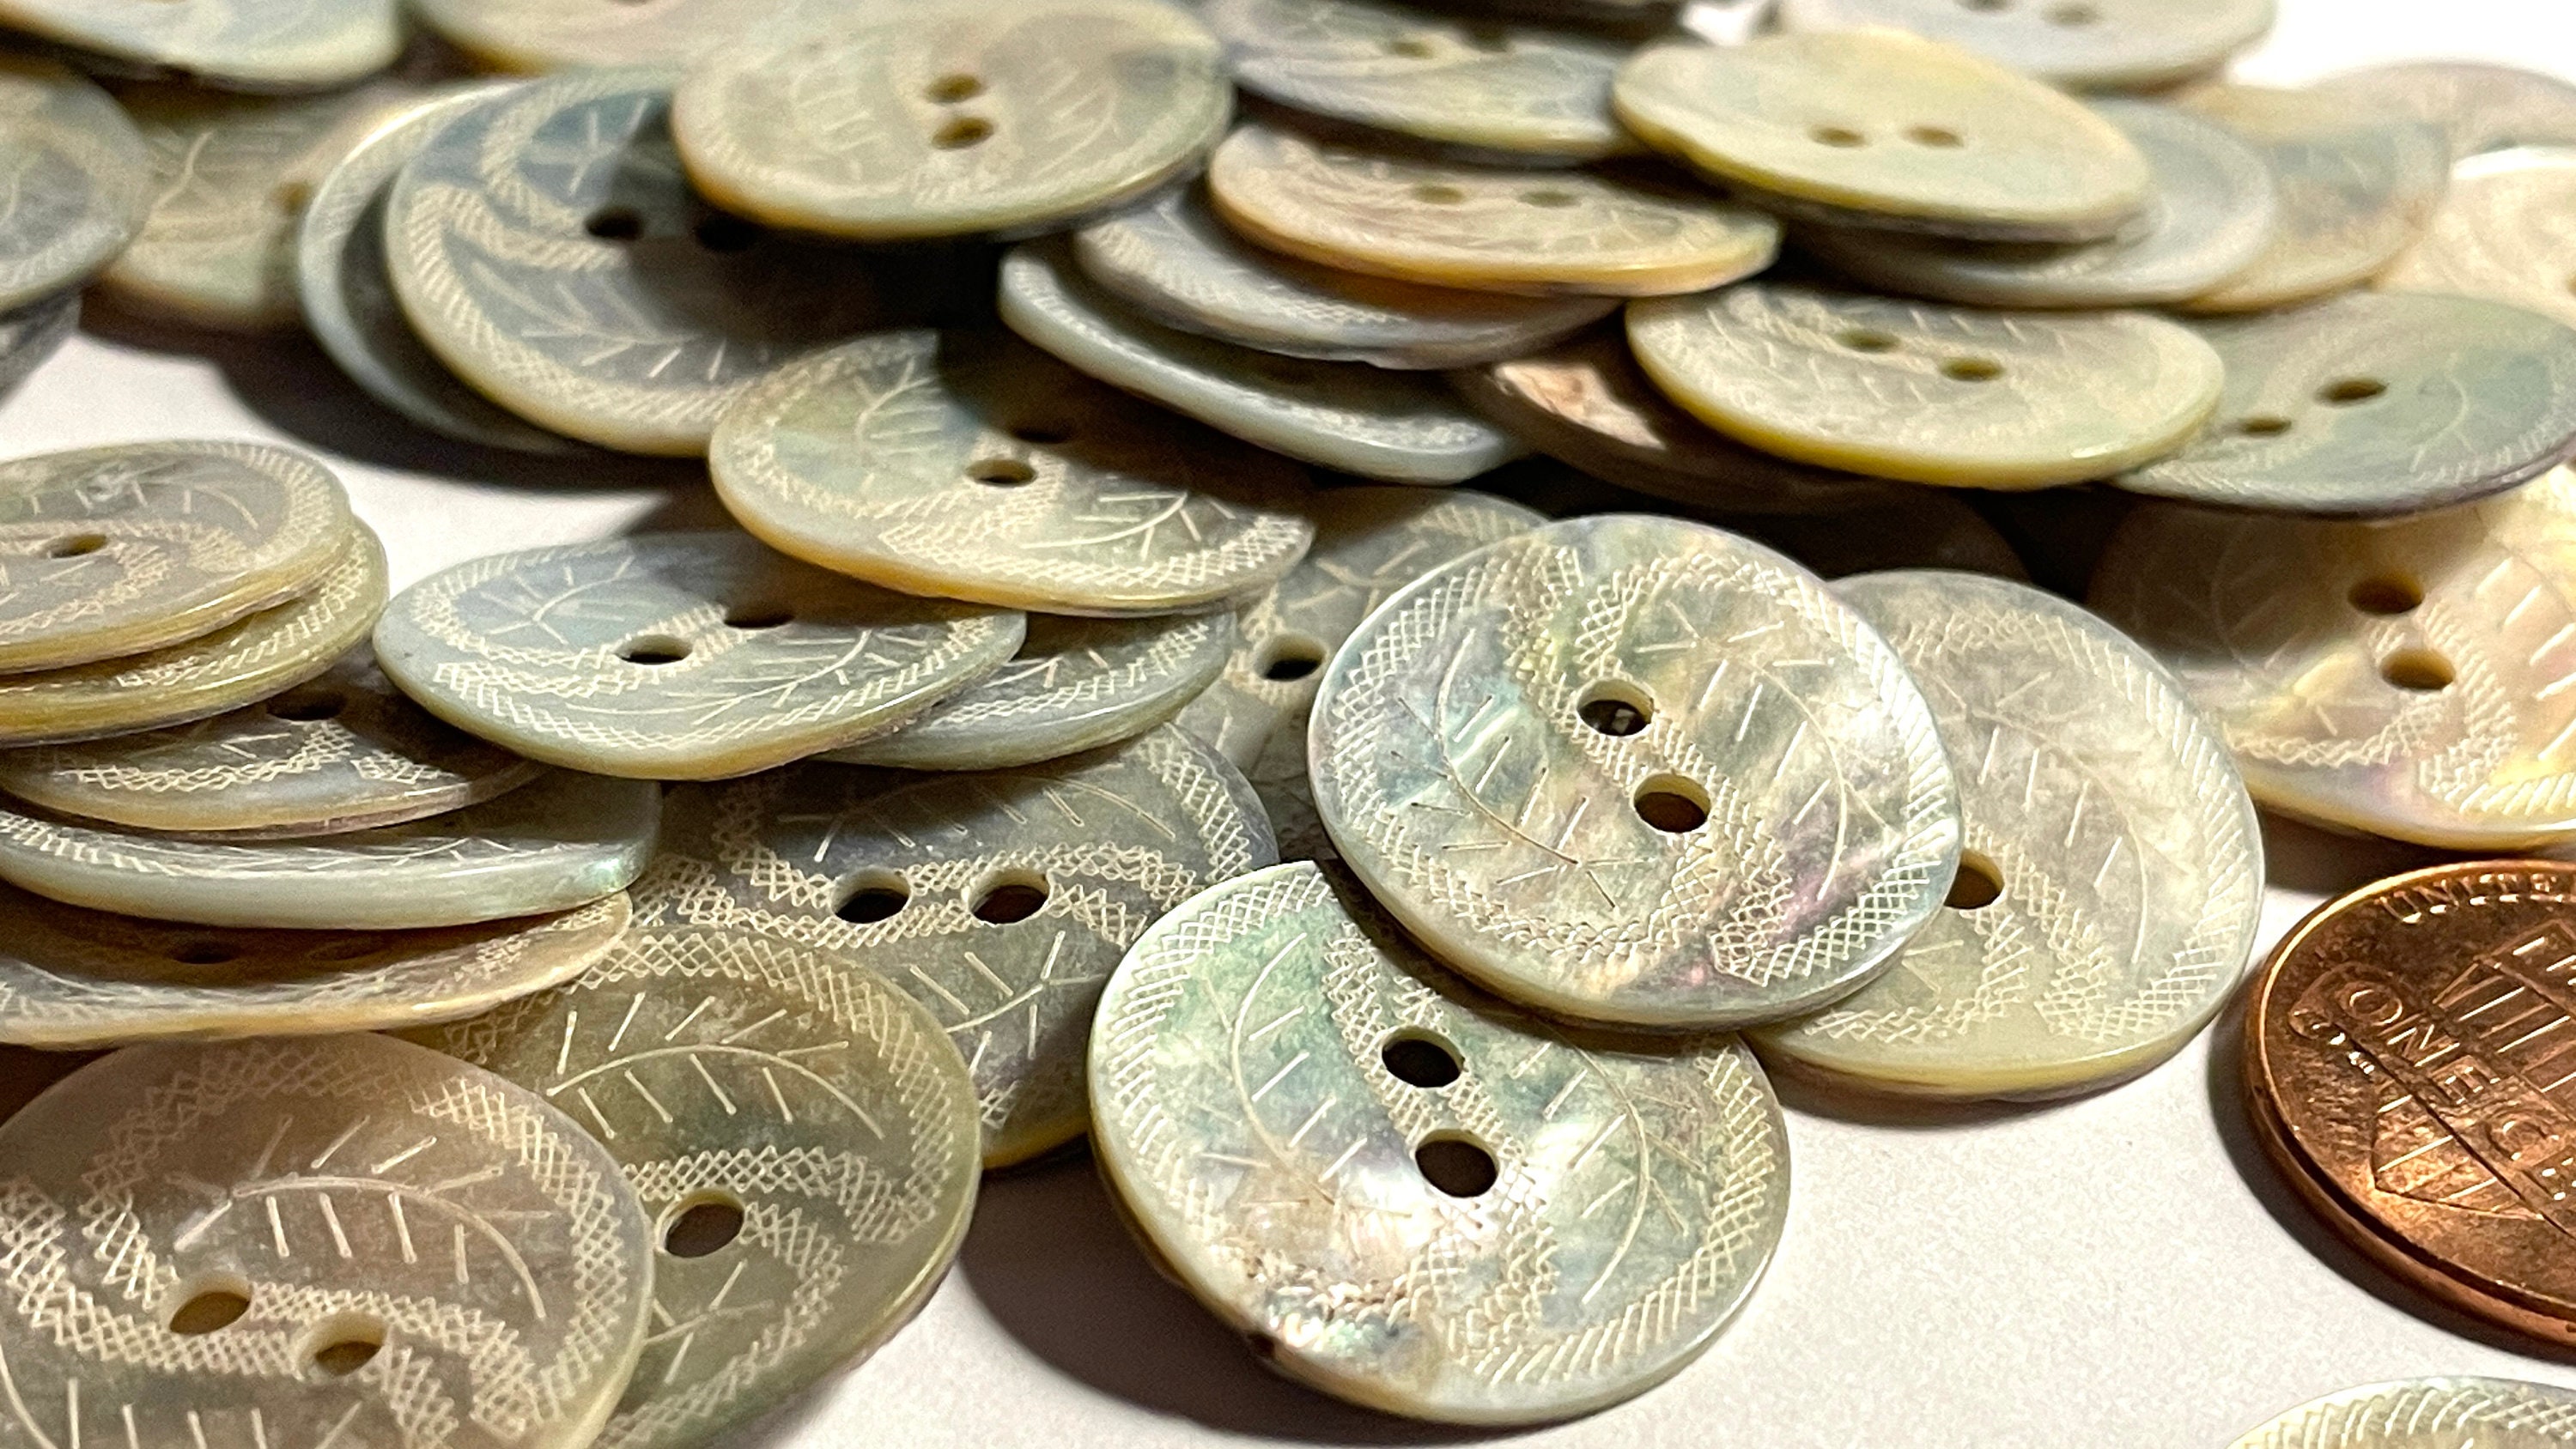 Anchrisly Buttons for Sewing 100pcs 1 inch Buttons Large Wood Buttons for Crafts Mixed Big Wooden Vintage Assorted Buttons 2 Holes Round Decorative Wo